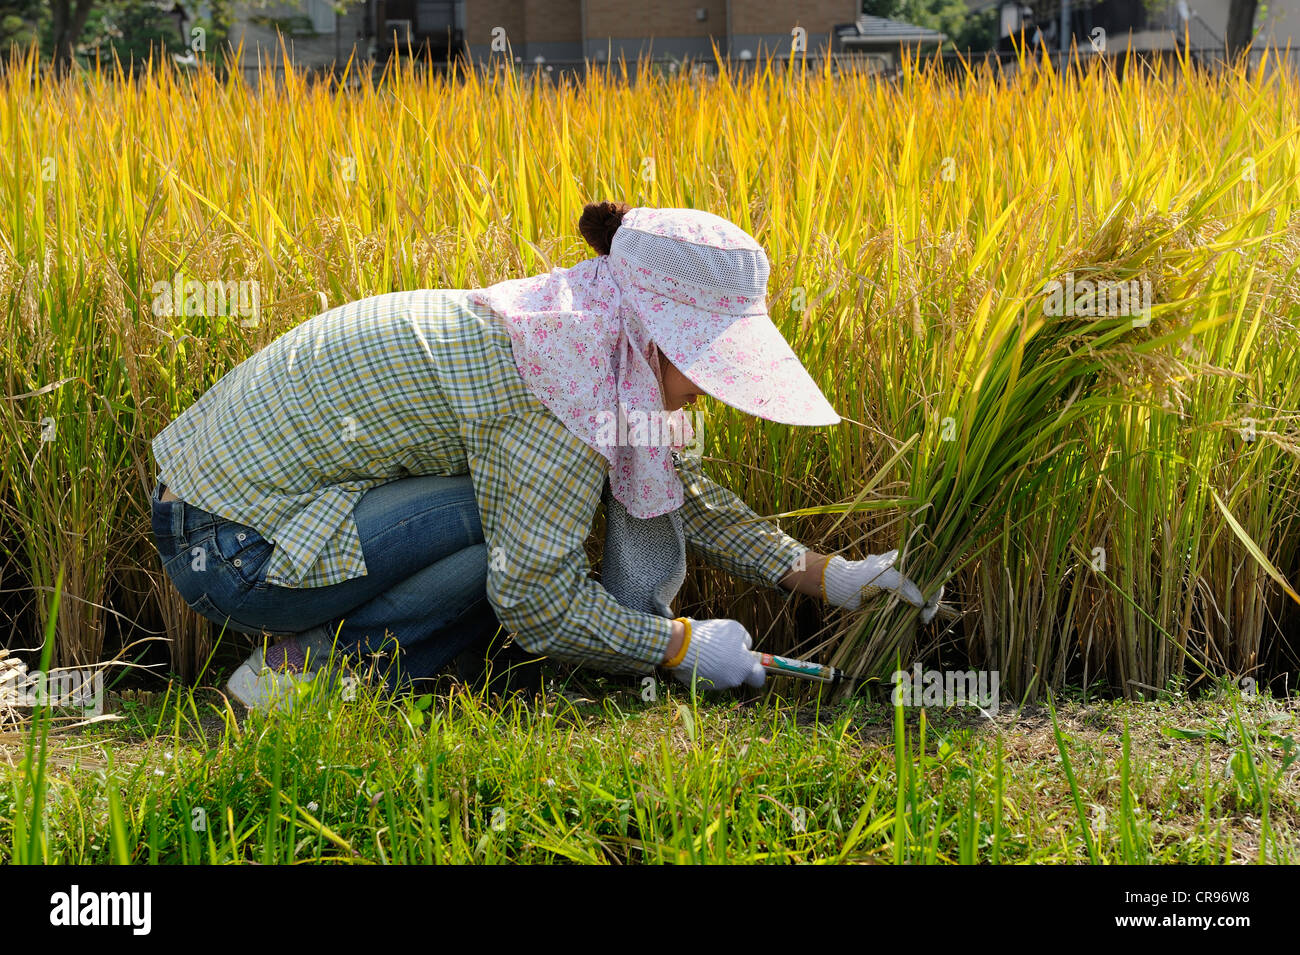 Japanese woman wearing a large cap and gloves harvesting rice with a sickle in Iwakura, near Kyoto, Japan, Asia Stock Photo